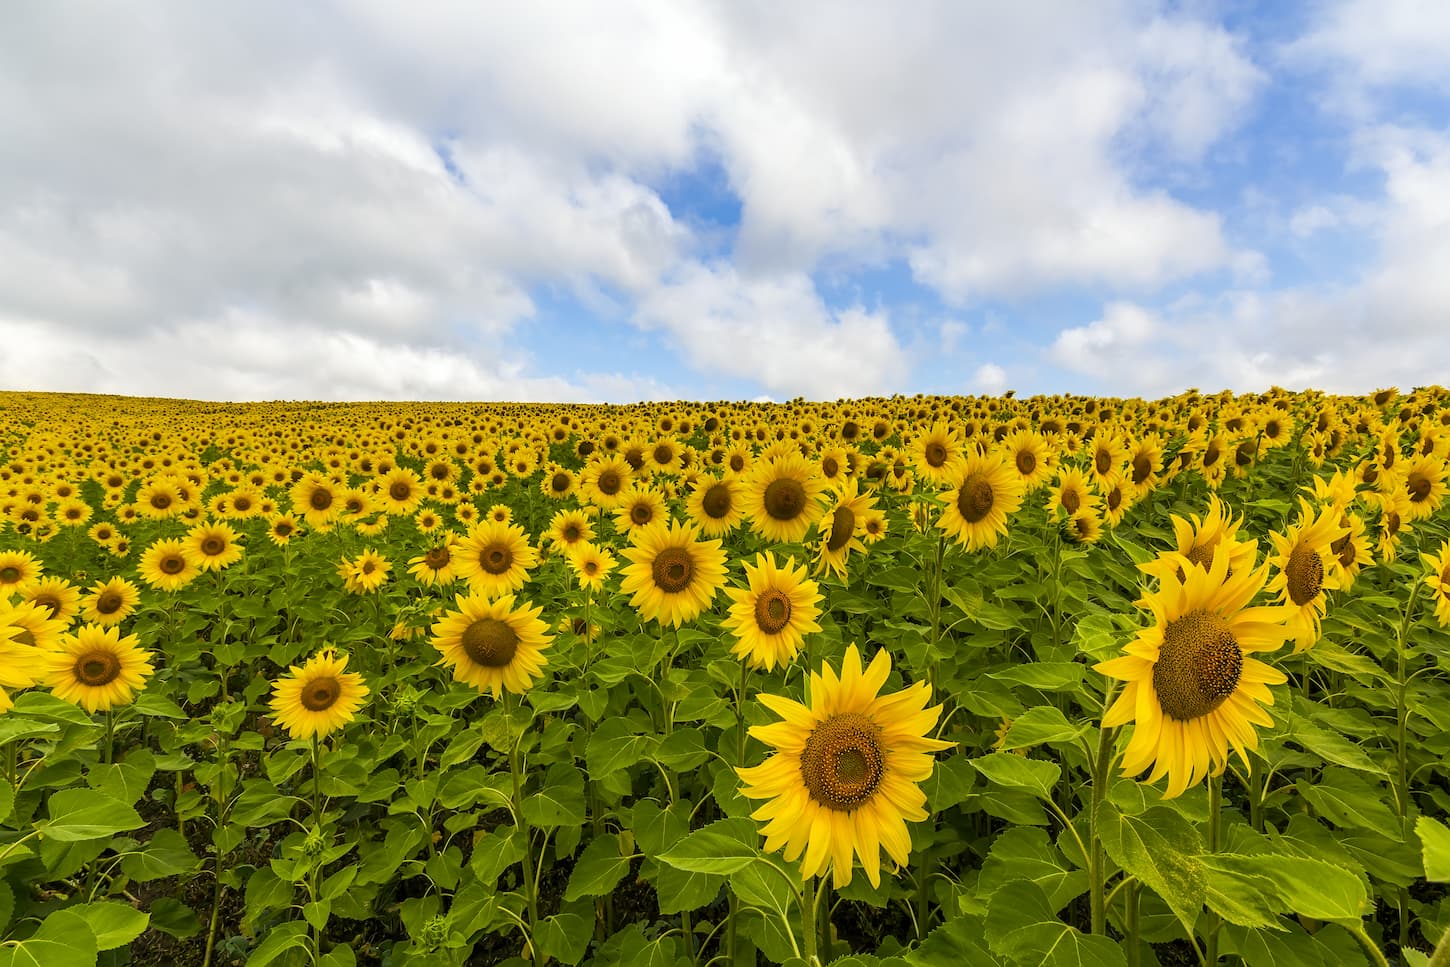 An image of sunflowers in a field on a blue sky background.